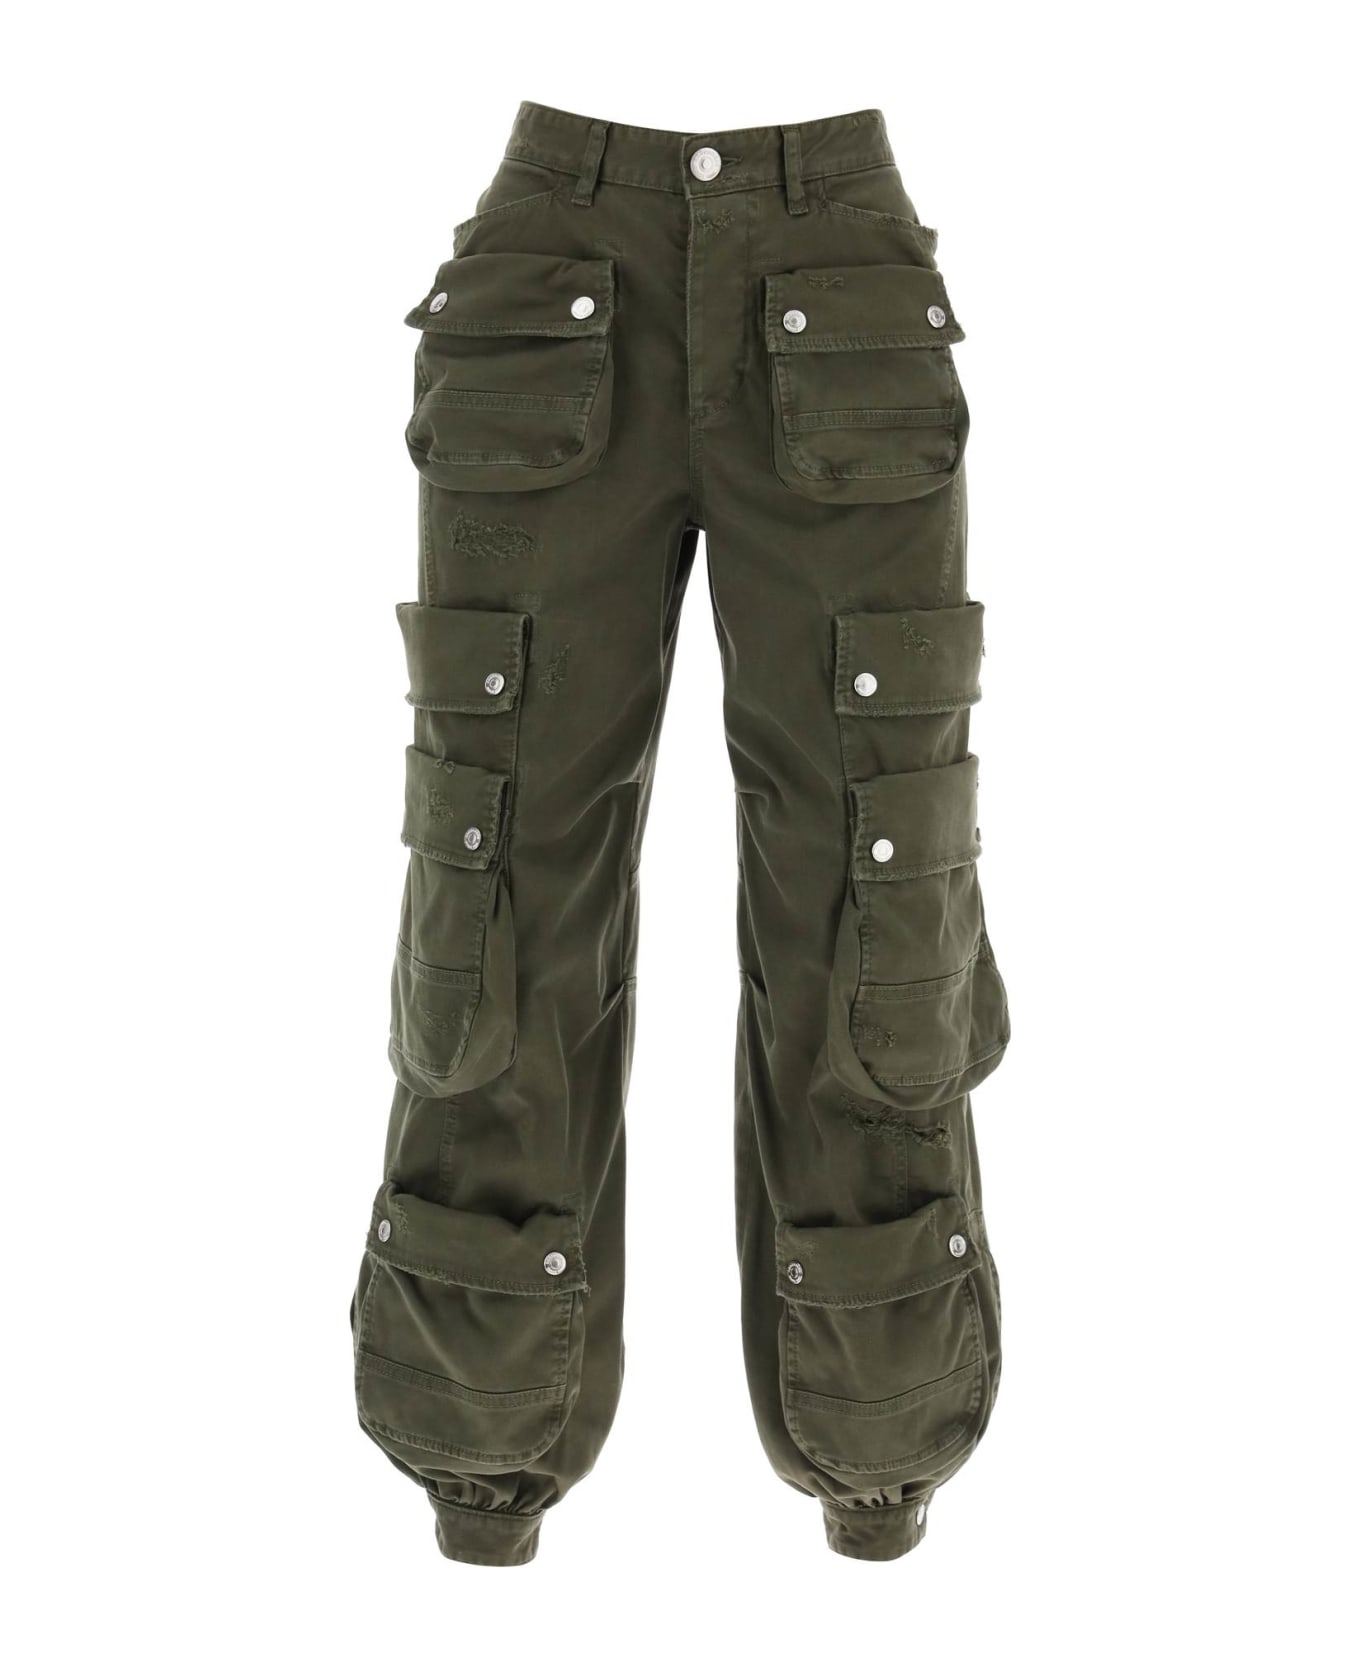 Dsquared2 Pocket Detailed Cargo Pants - MILITARY GREEN (Green)